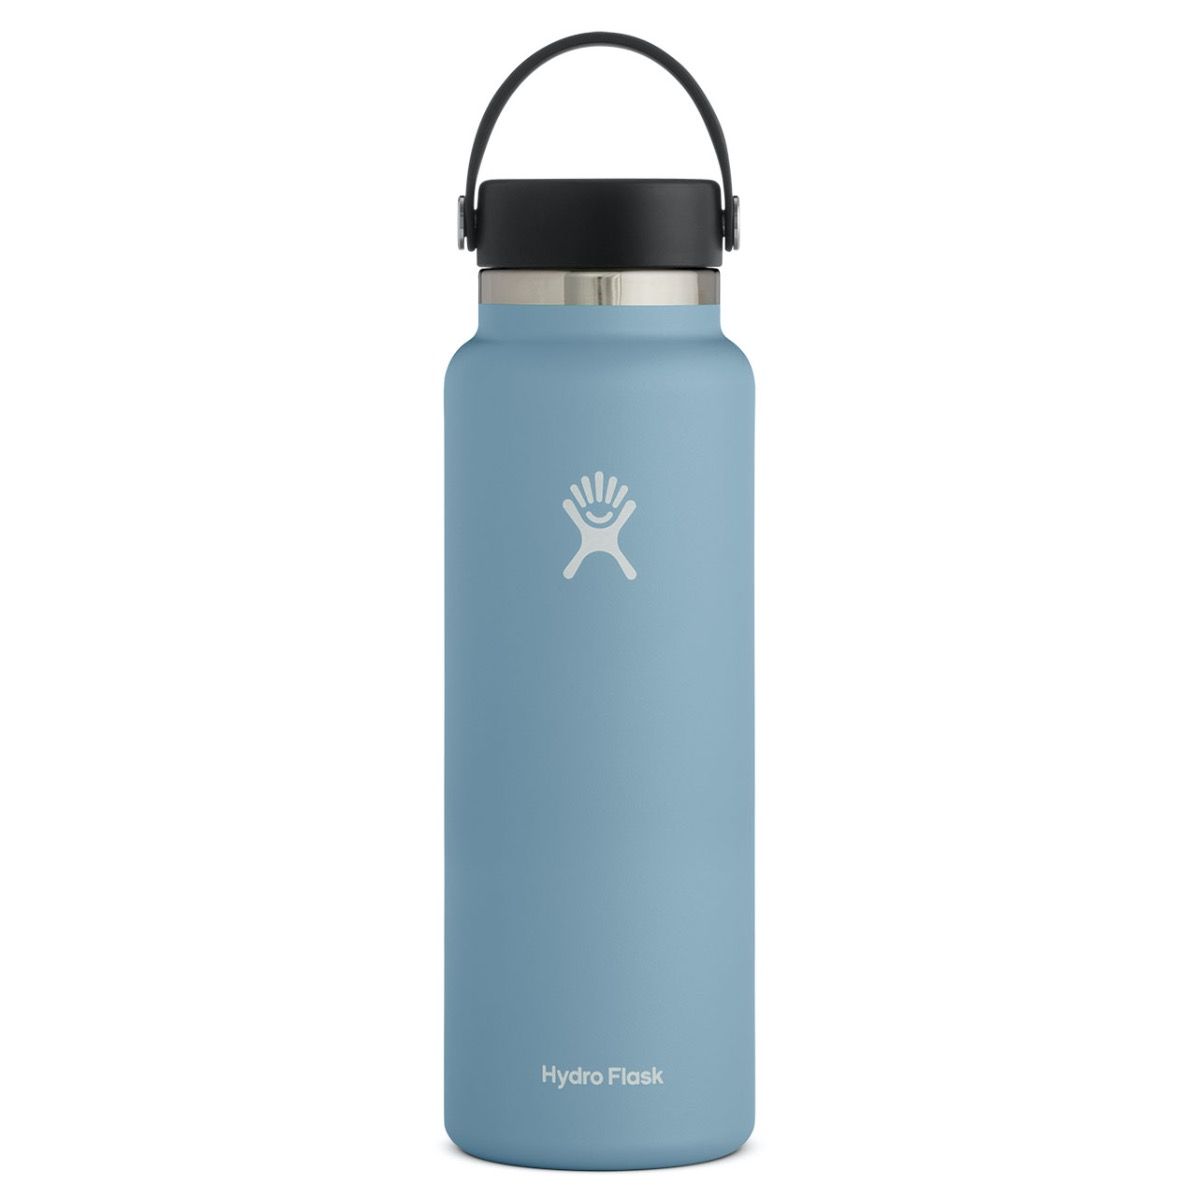 Hydro Flask Bottles: 40 oz ($28), 32 oz ($25), 43.75% off total: 25% instant discount for Holiday Sale + 25% stacked additional coupon discount YMMV